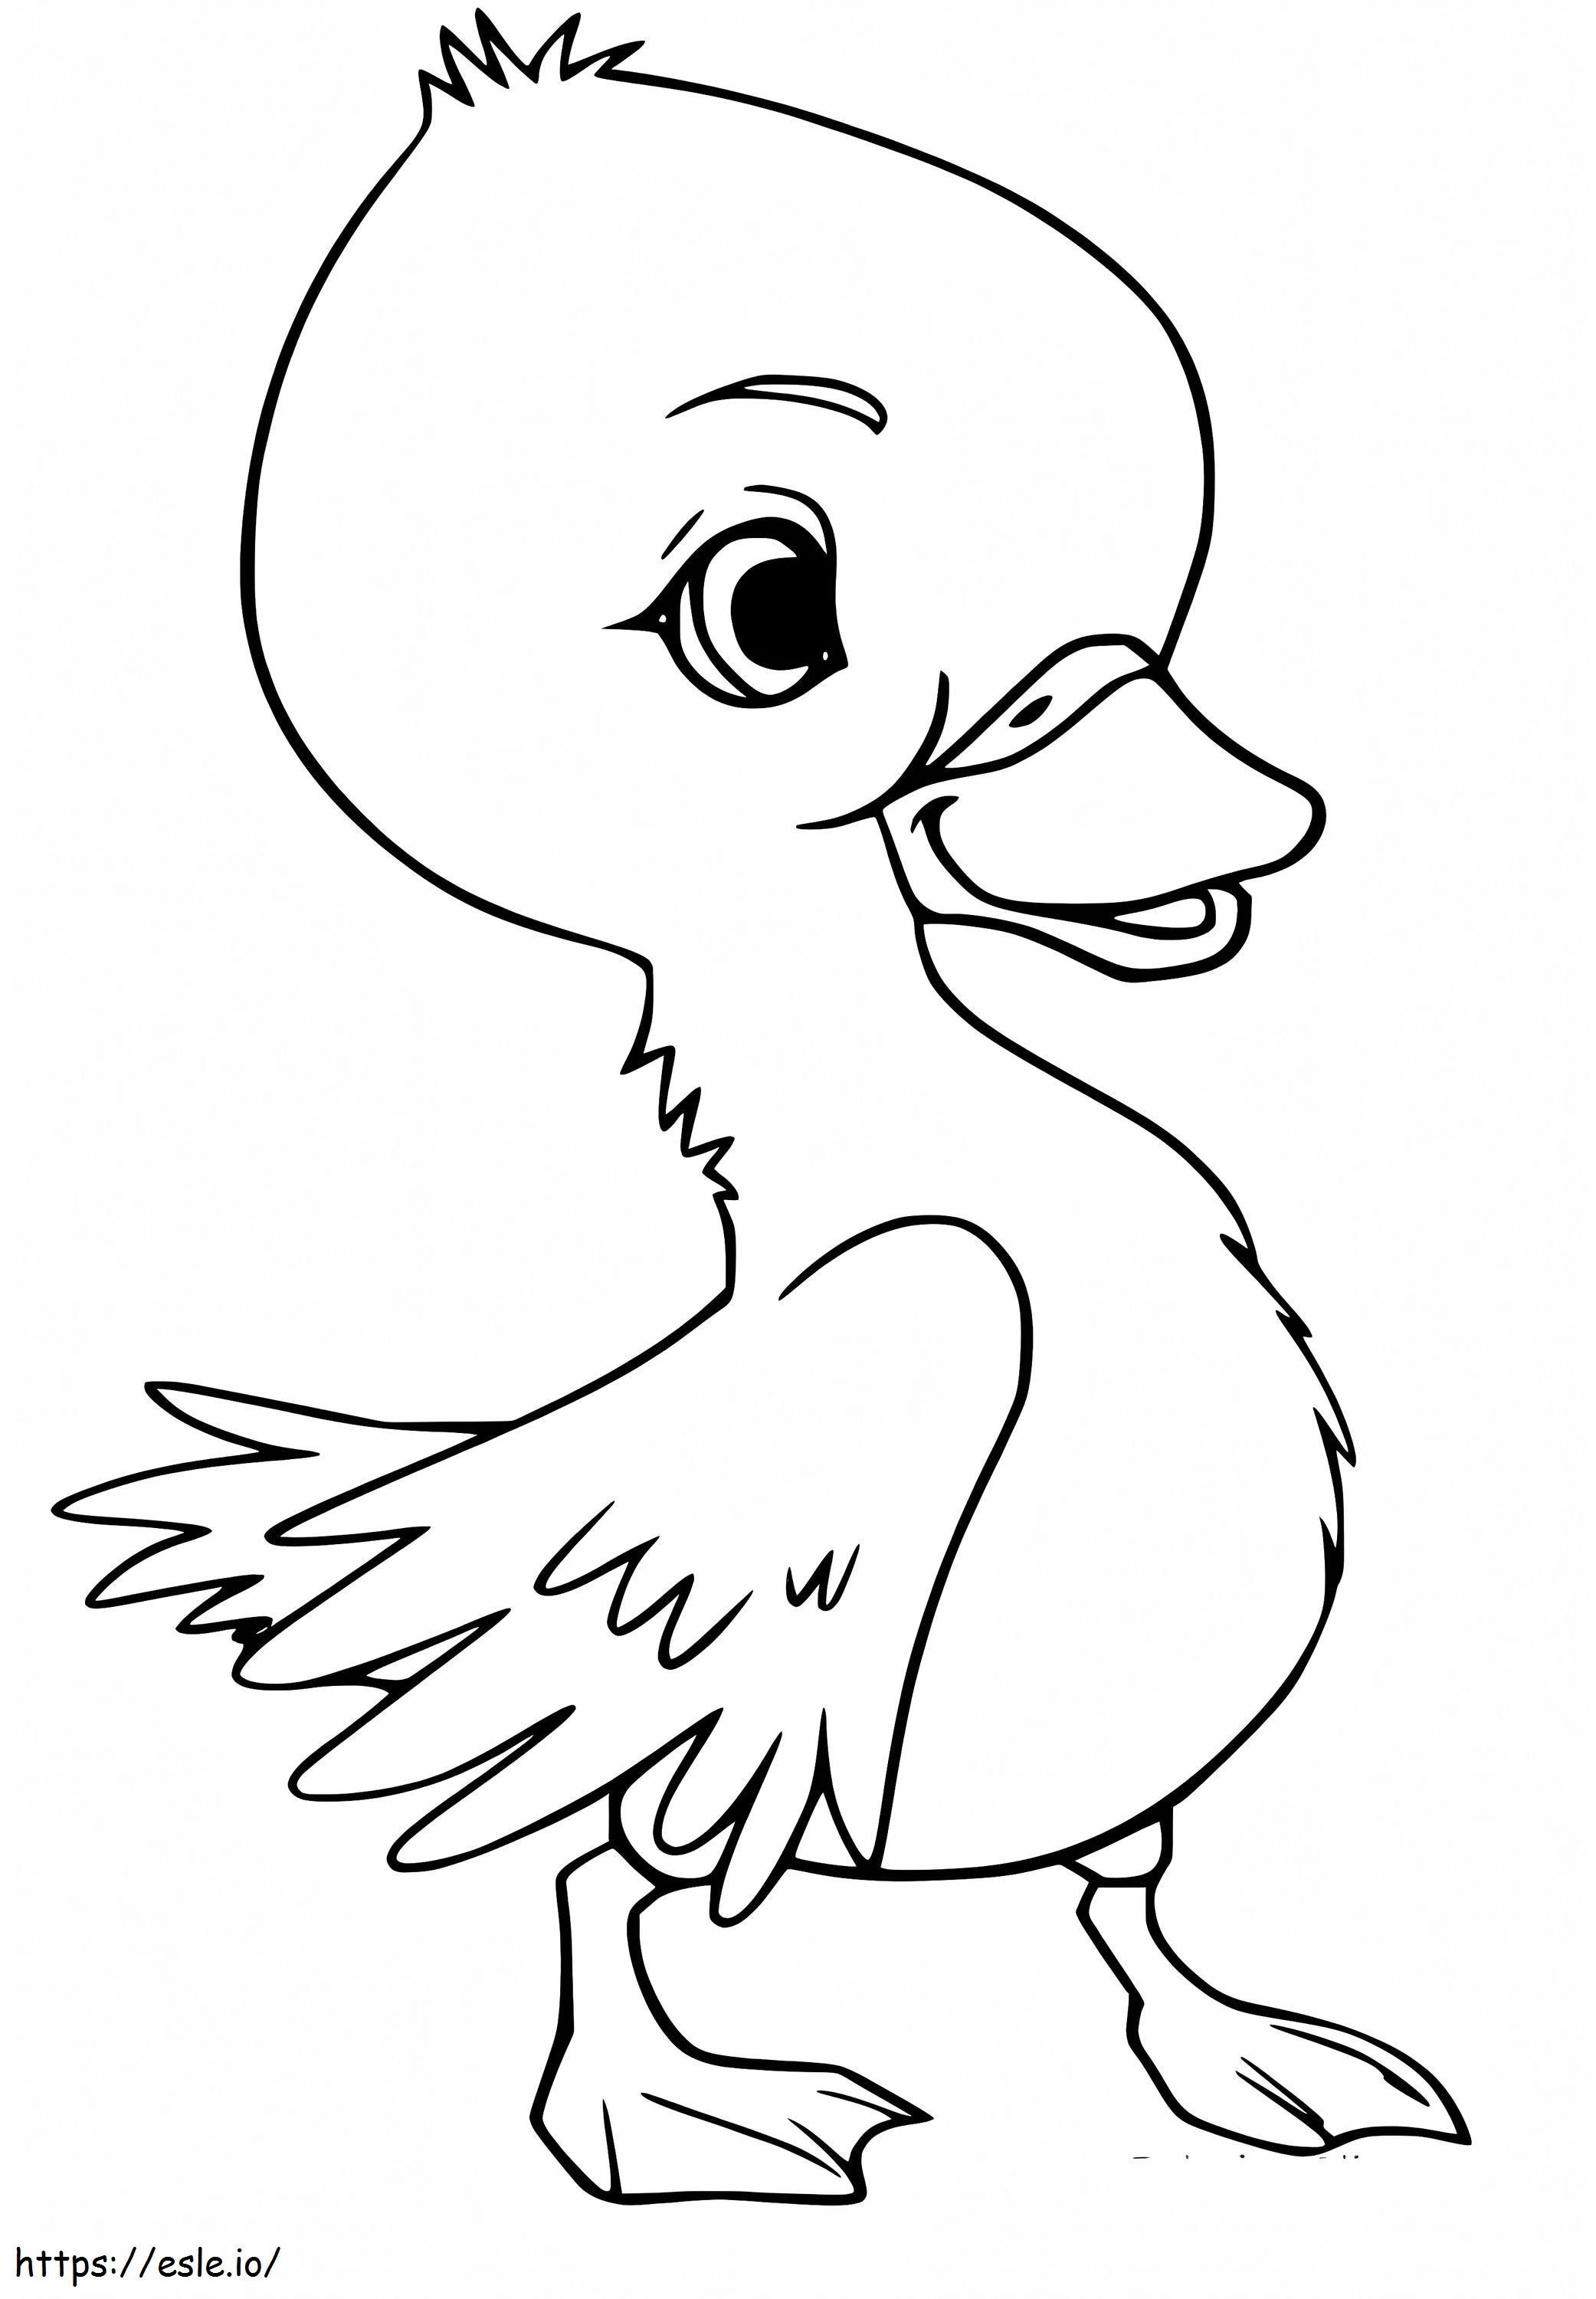 Printable Cute Duckling coloring page